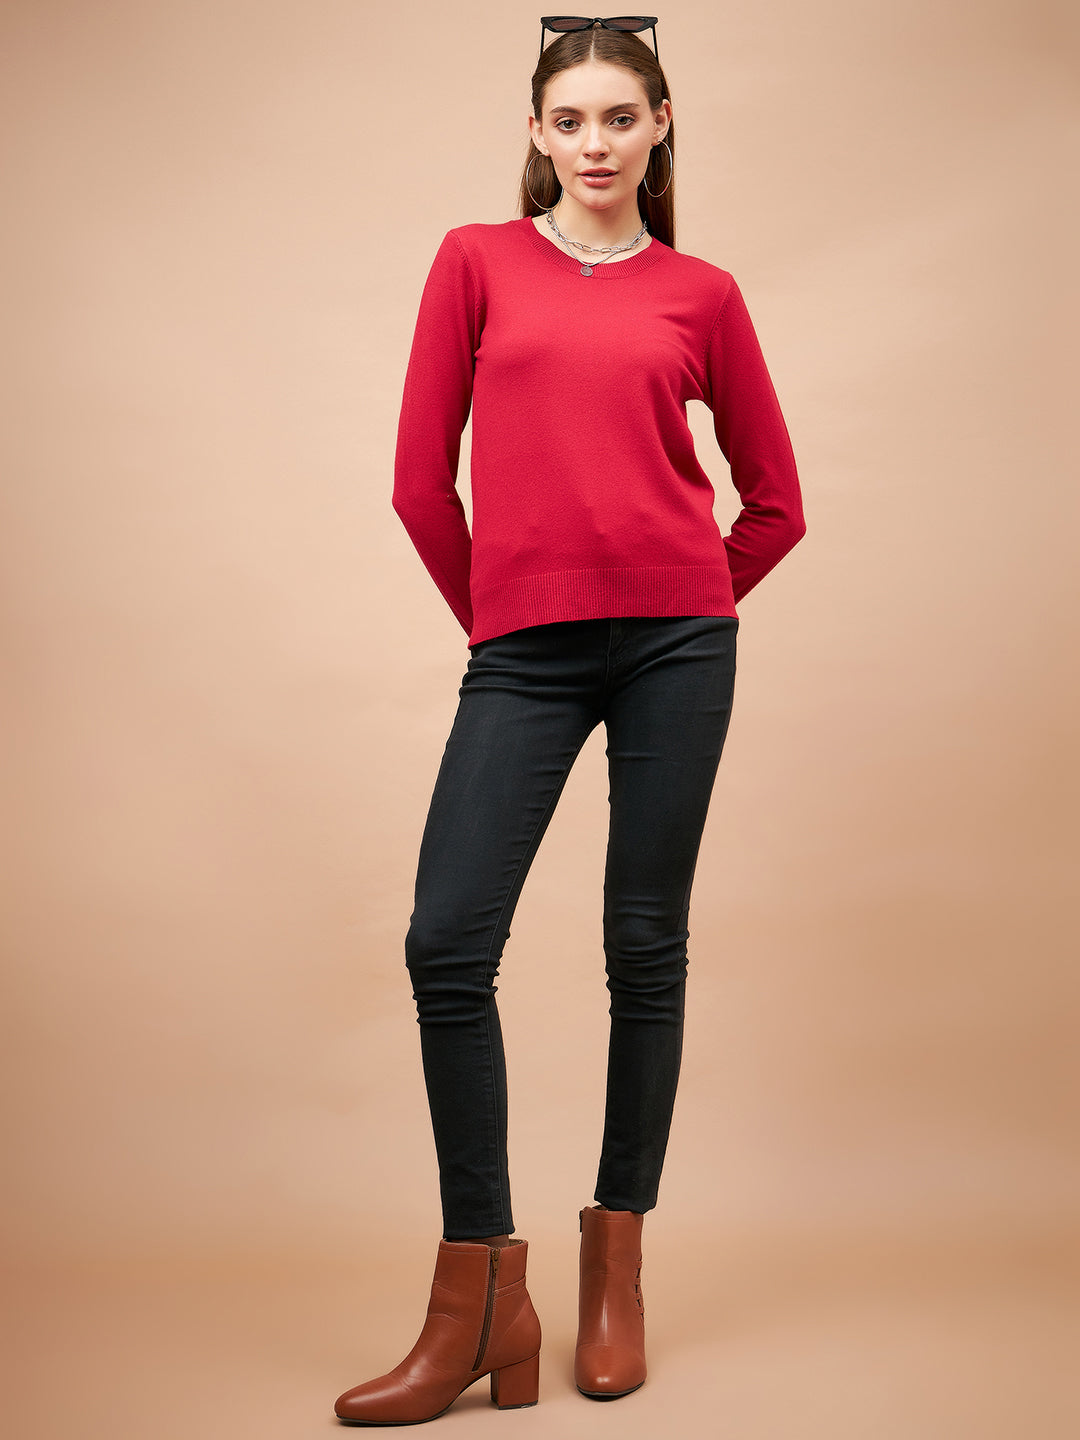 Gipsy Women Round Neck Straight Full Sleeve Acrylic Fabric Red Sweaters